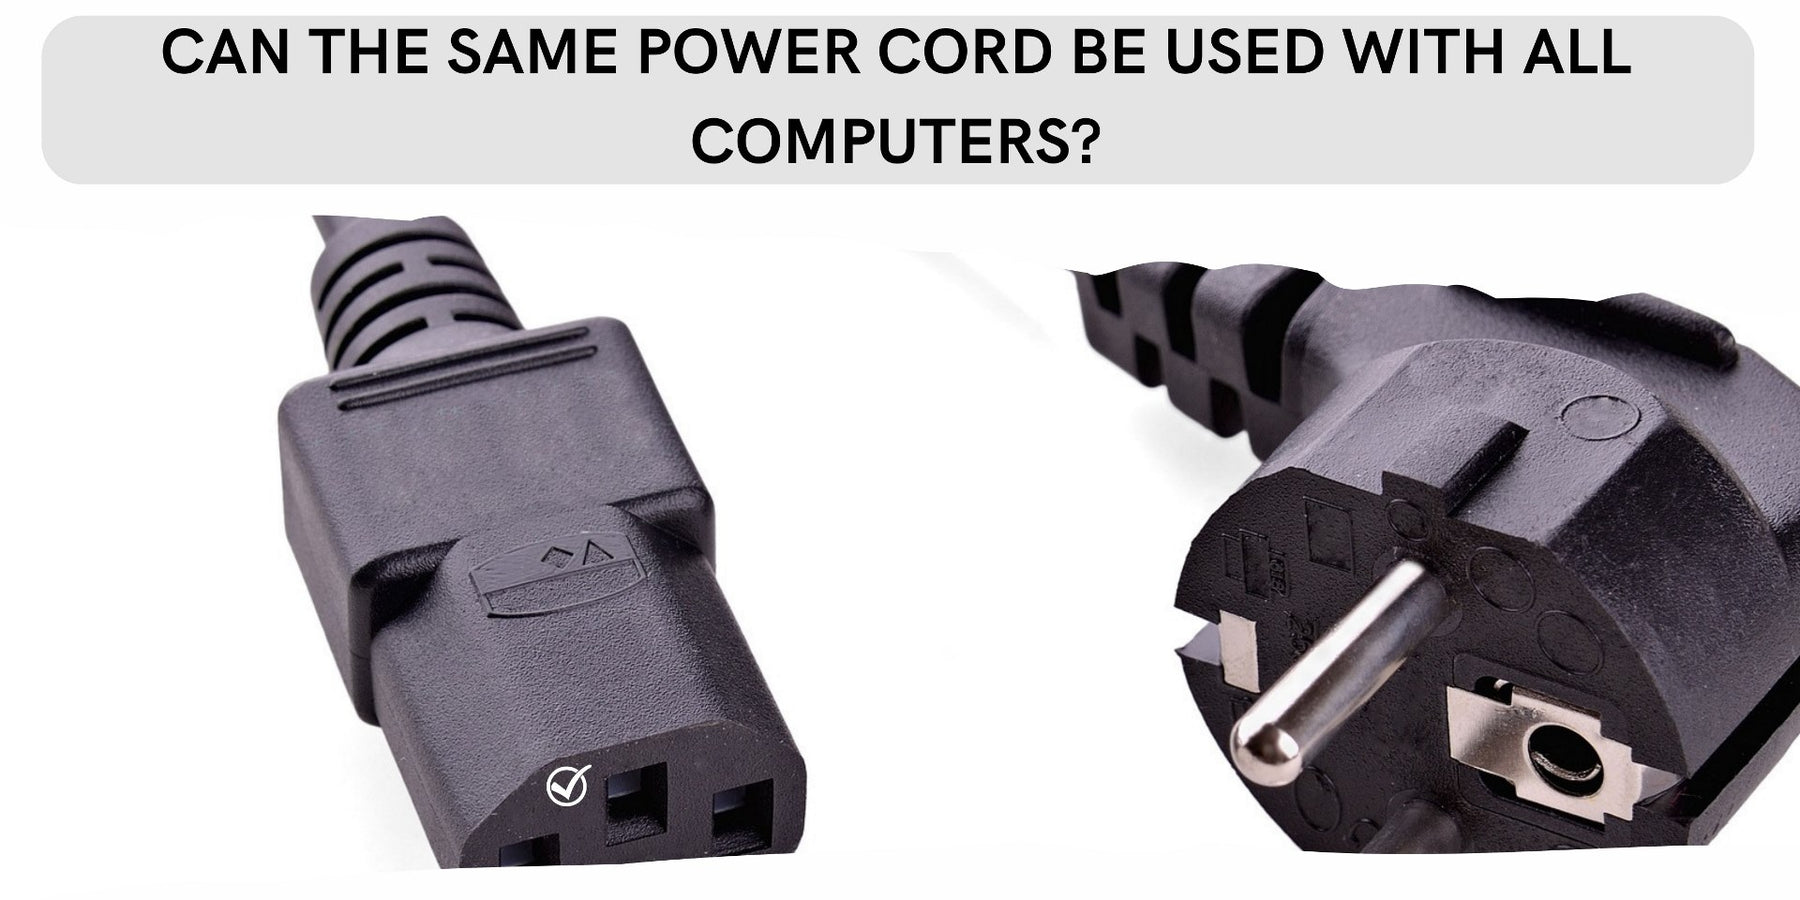 Can the Same Power Cord Be Used with All Computers?